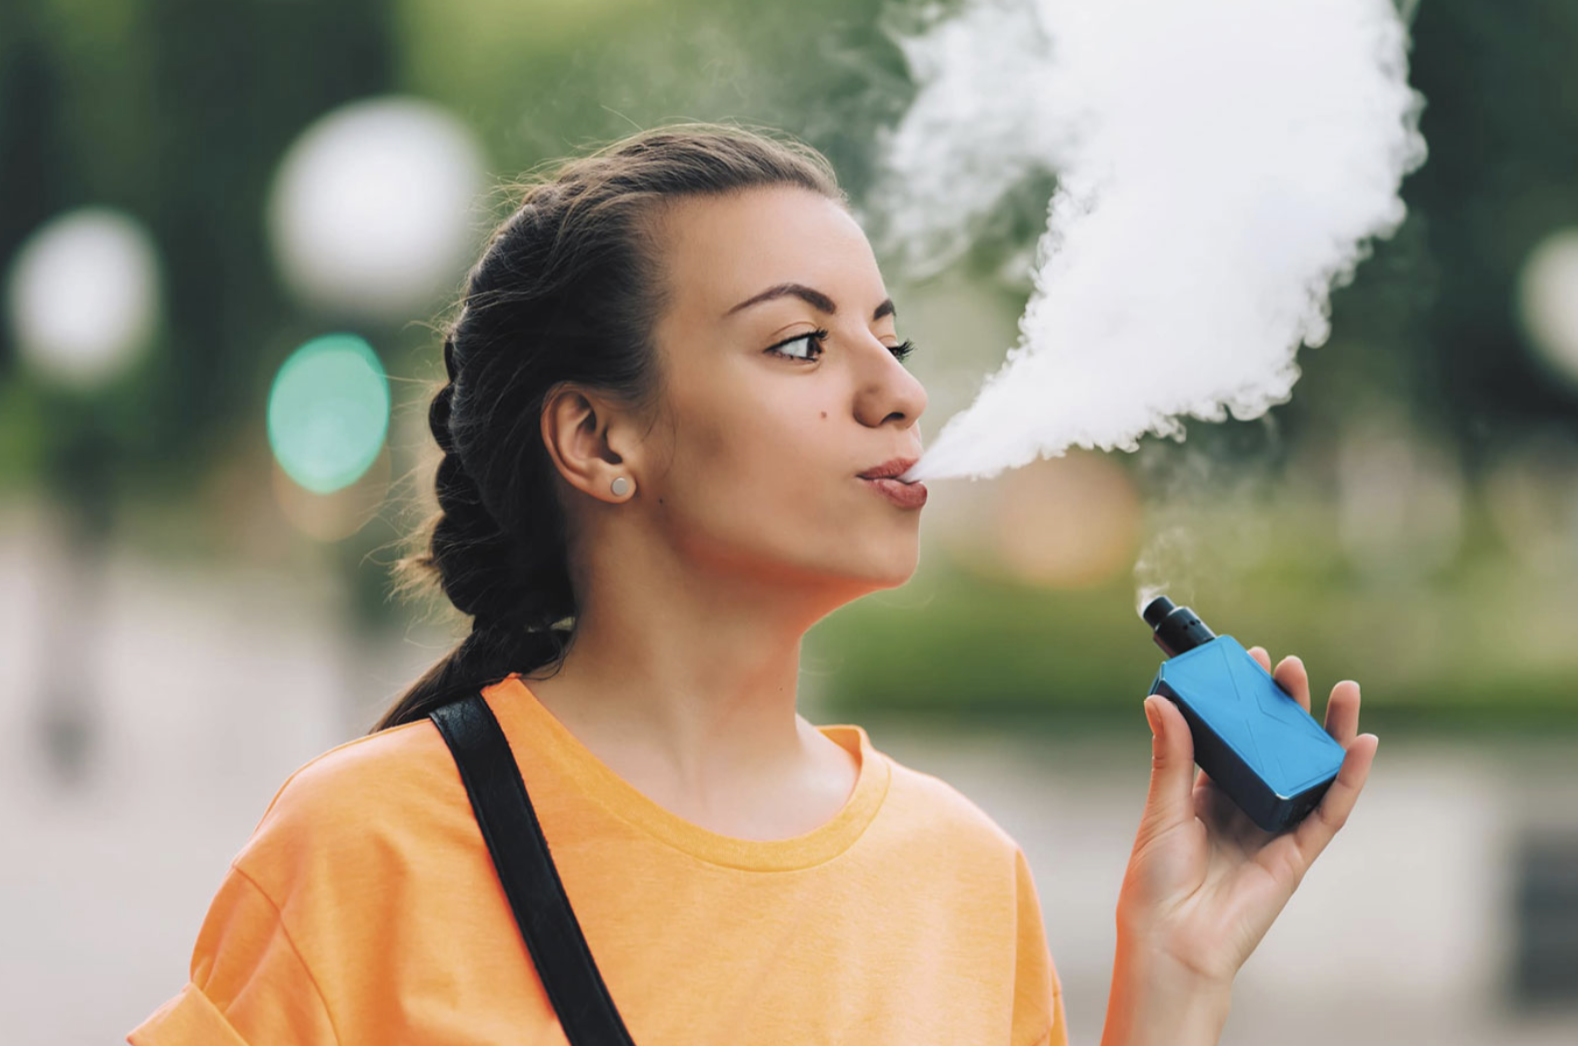 Vaping is illegal in Thailand